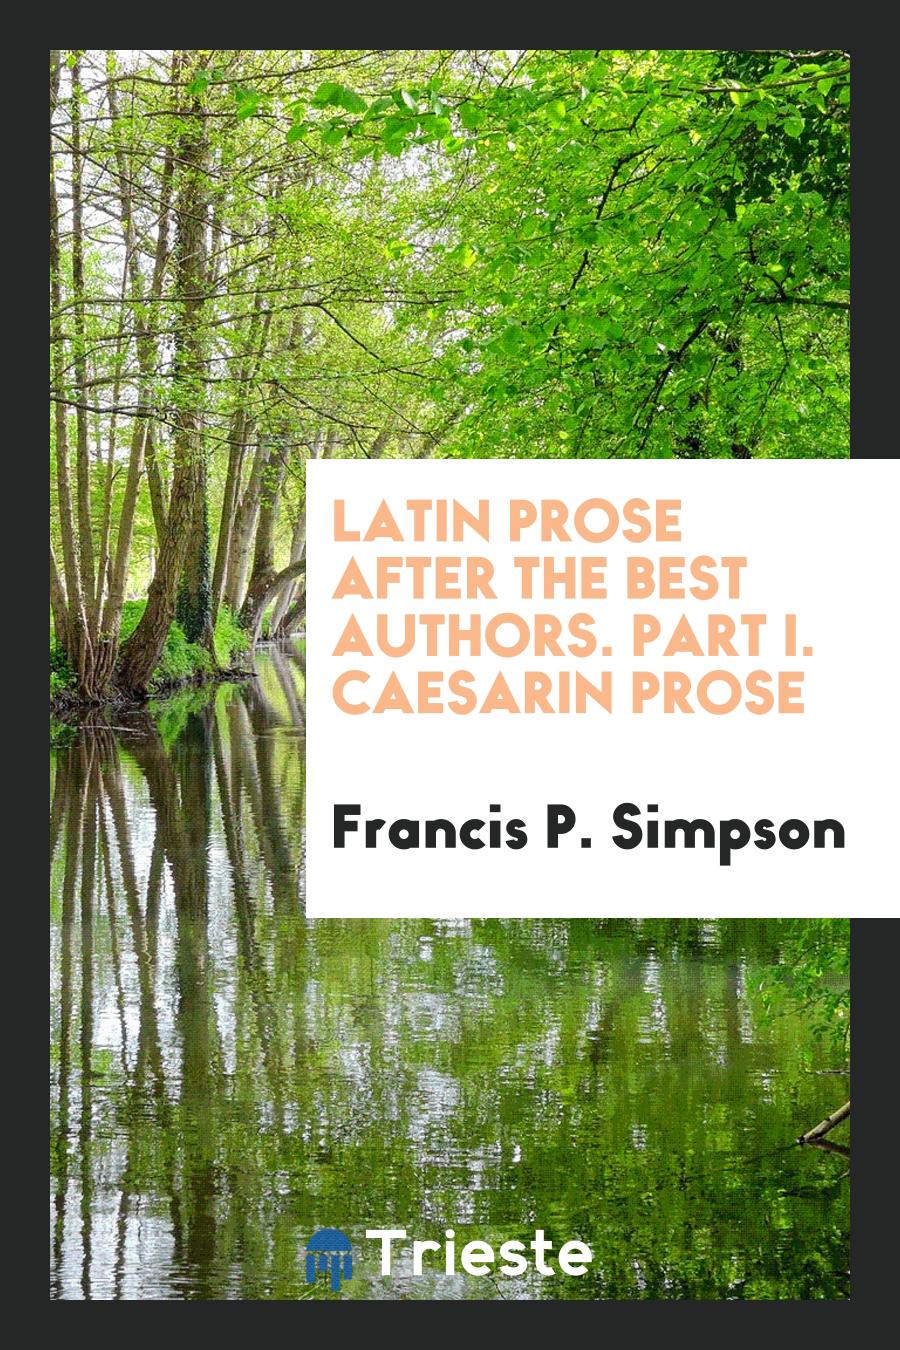 Latin Prose after the Best Authors. Part I. Caesarin Prose